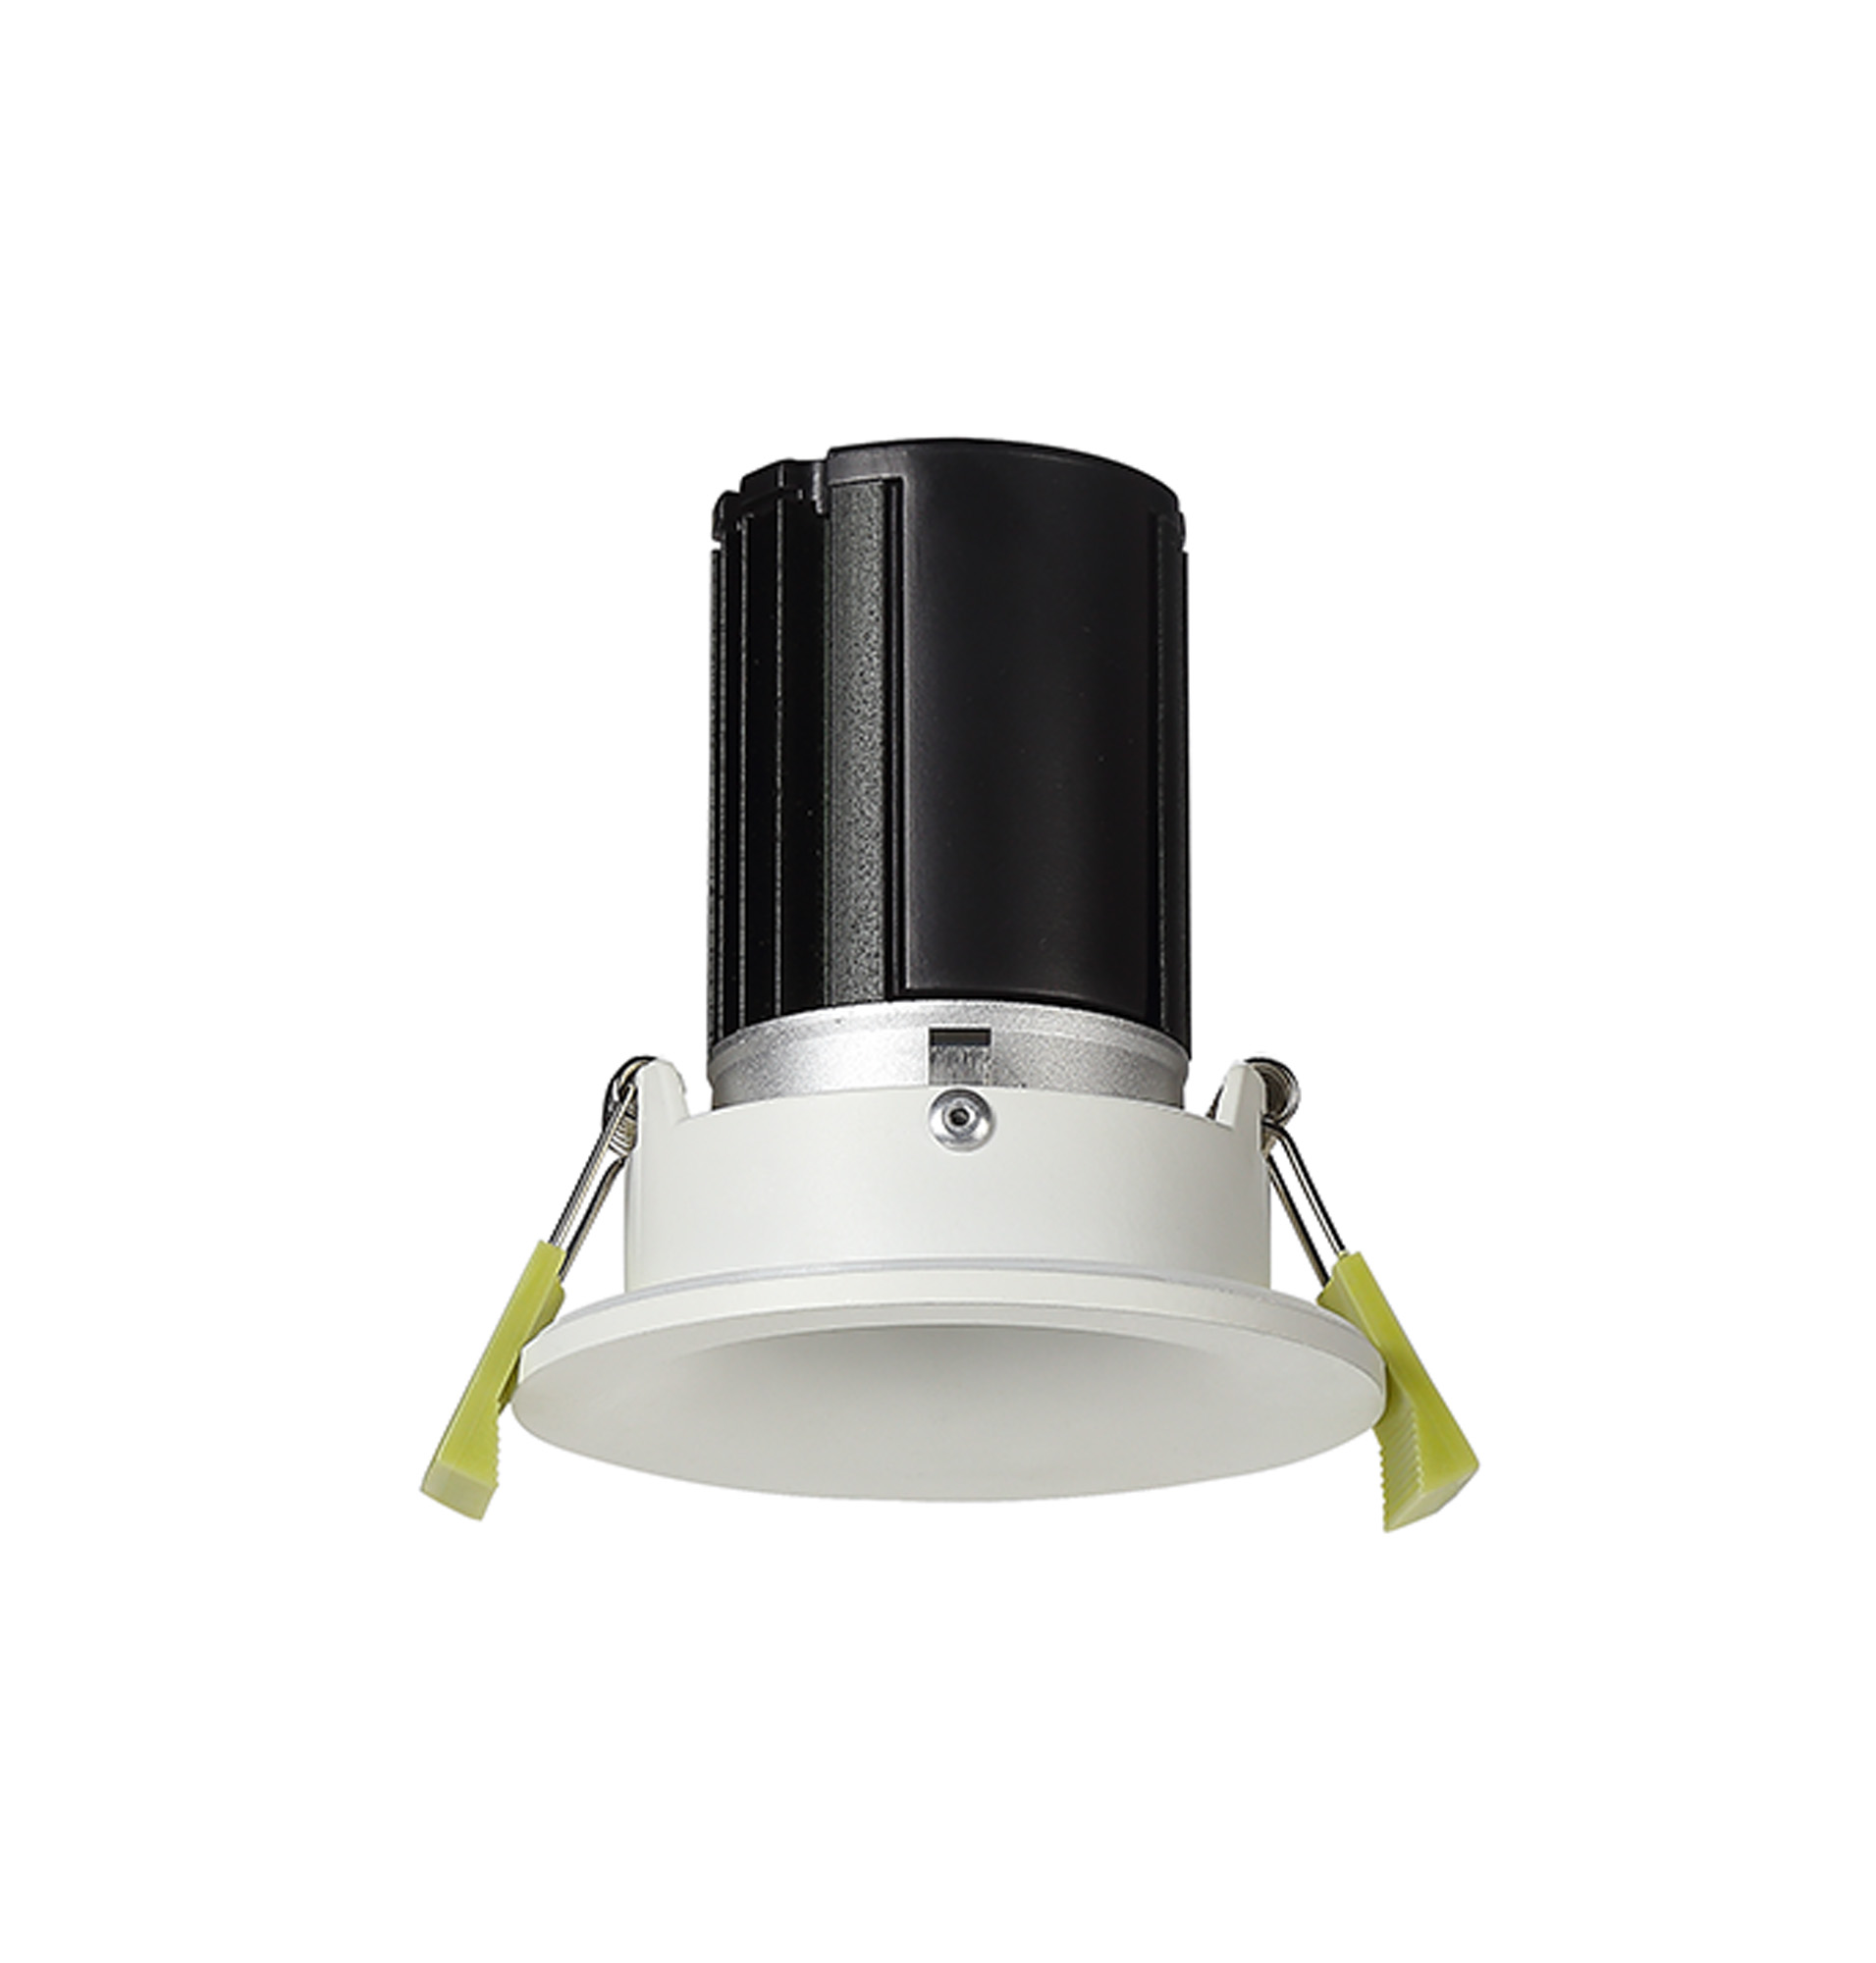 DM201522  Bruve 12 Tridonic powered 12W 2700K 1200lm 12° LED Engine;350mA ; CRI>90 LED Engine Matt White Fixed Round Recessed Downlight; Inner Glass cover; IP65